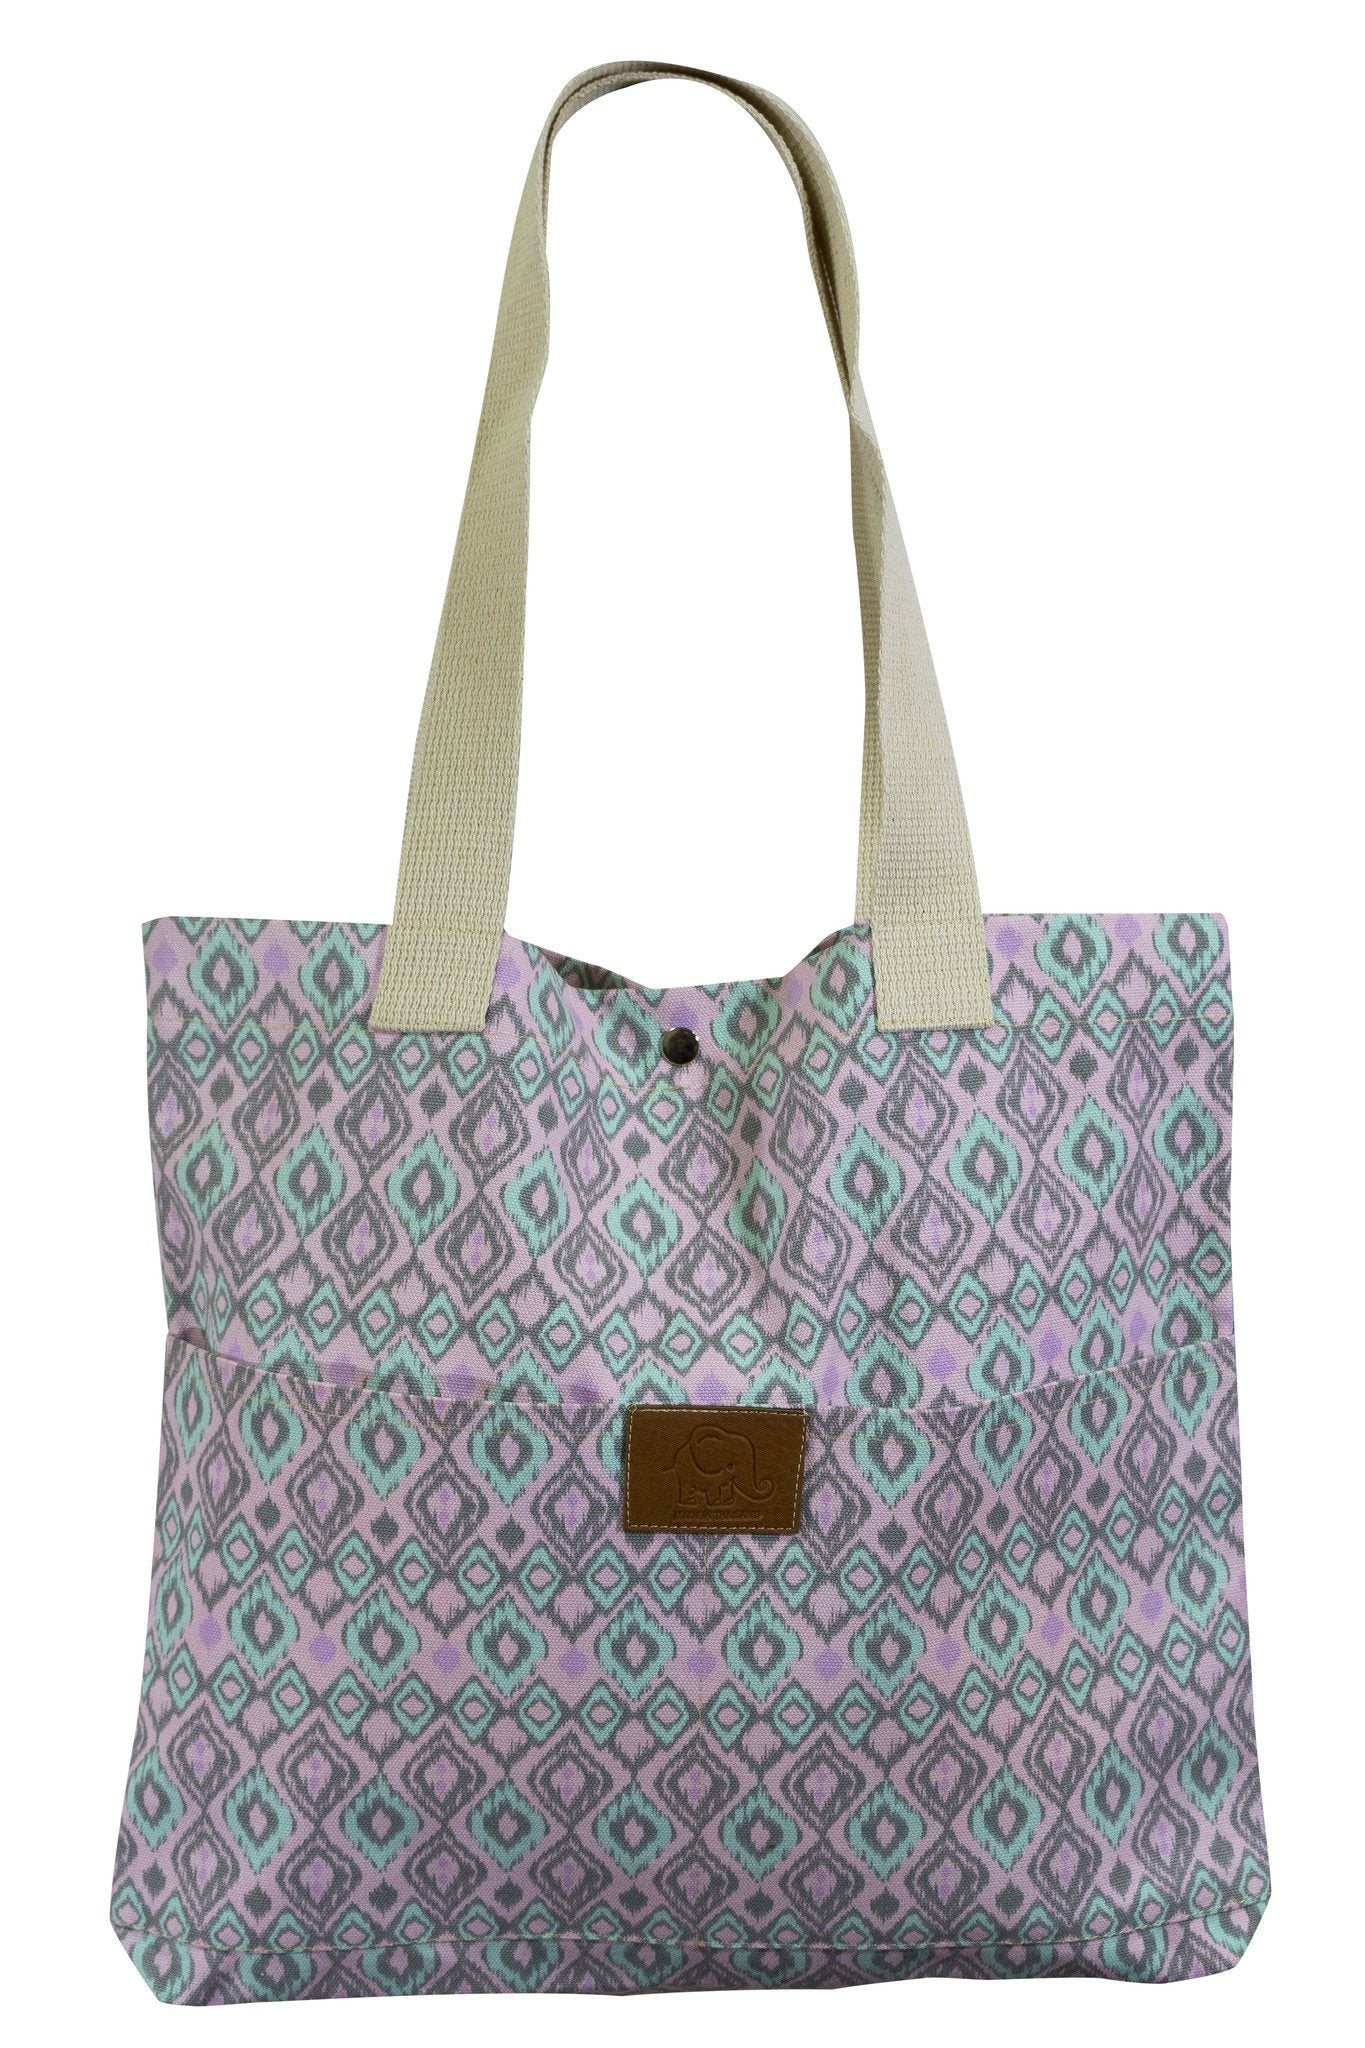 Mrs. Tote Shoulder bag Cotton Canvas Printed with Two front Pocket - CCCollections